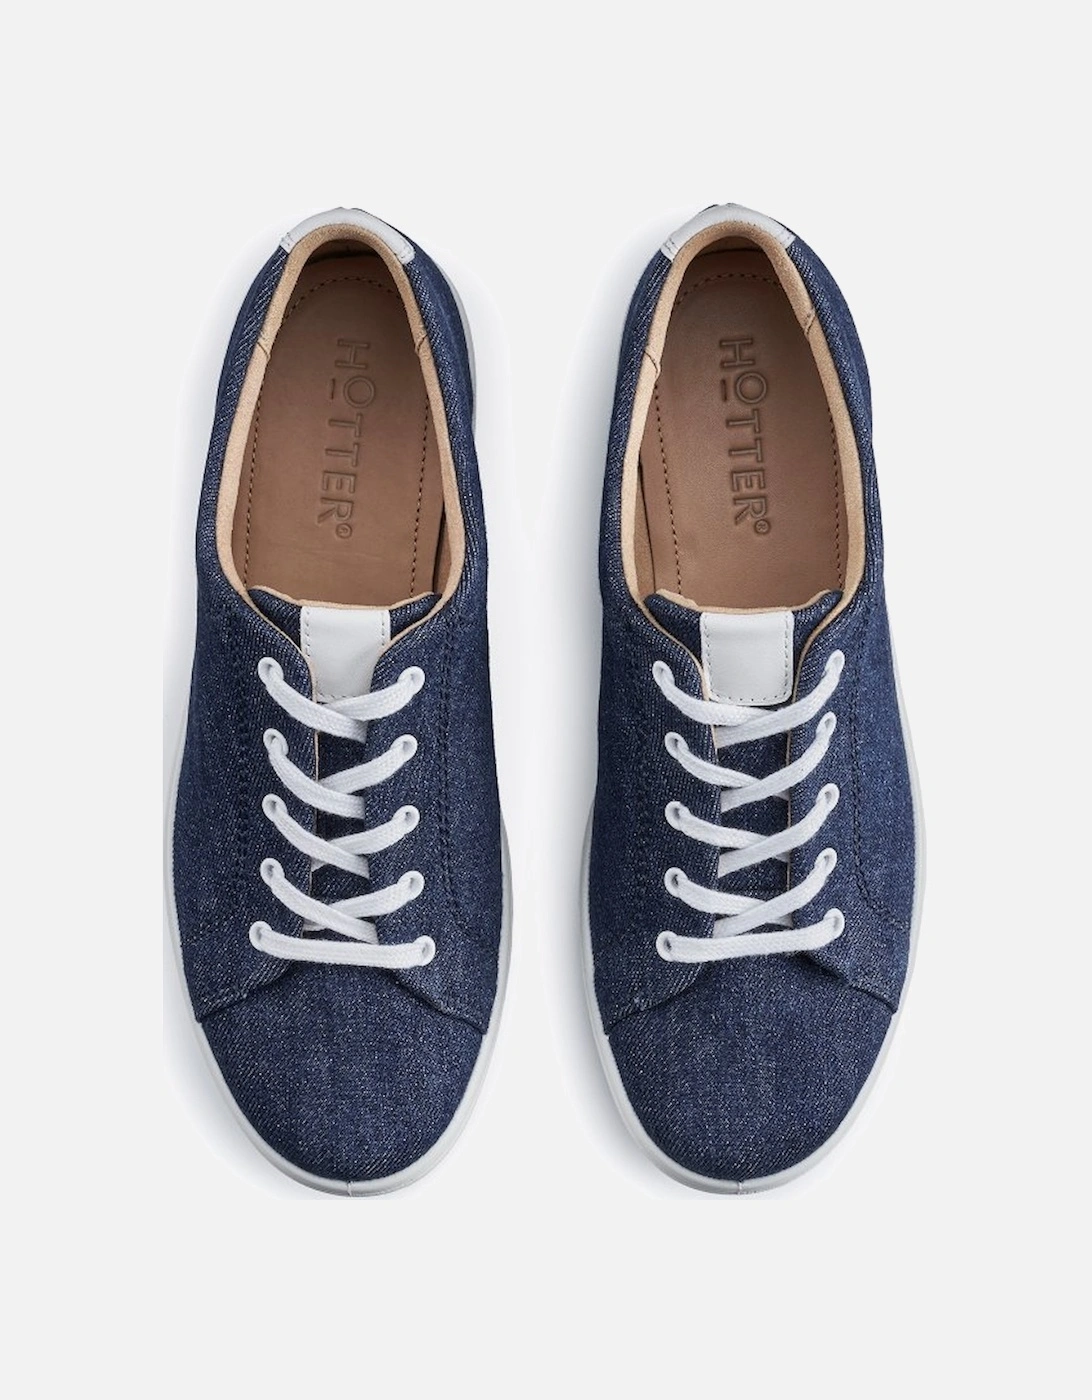 Molly Womens Canvas Shoes